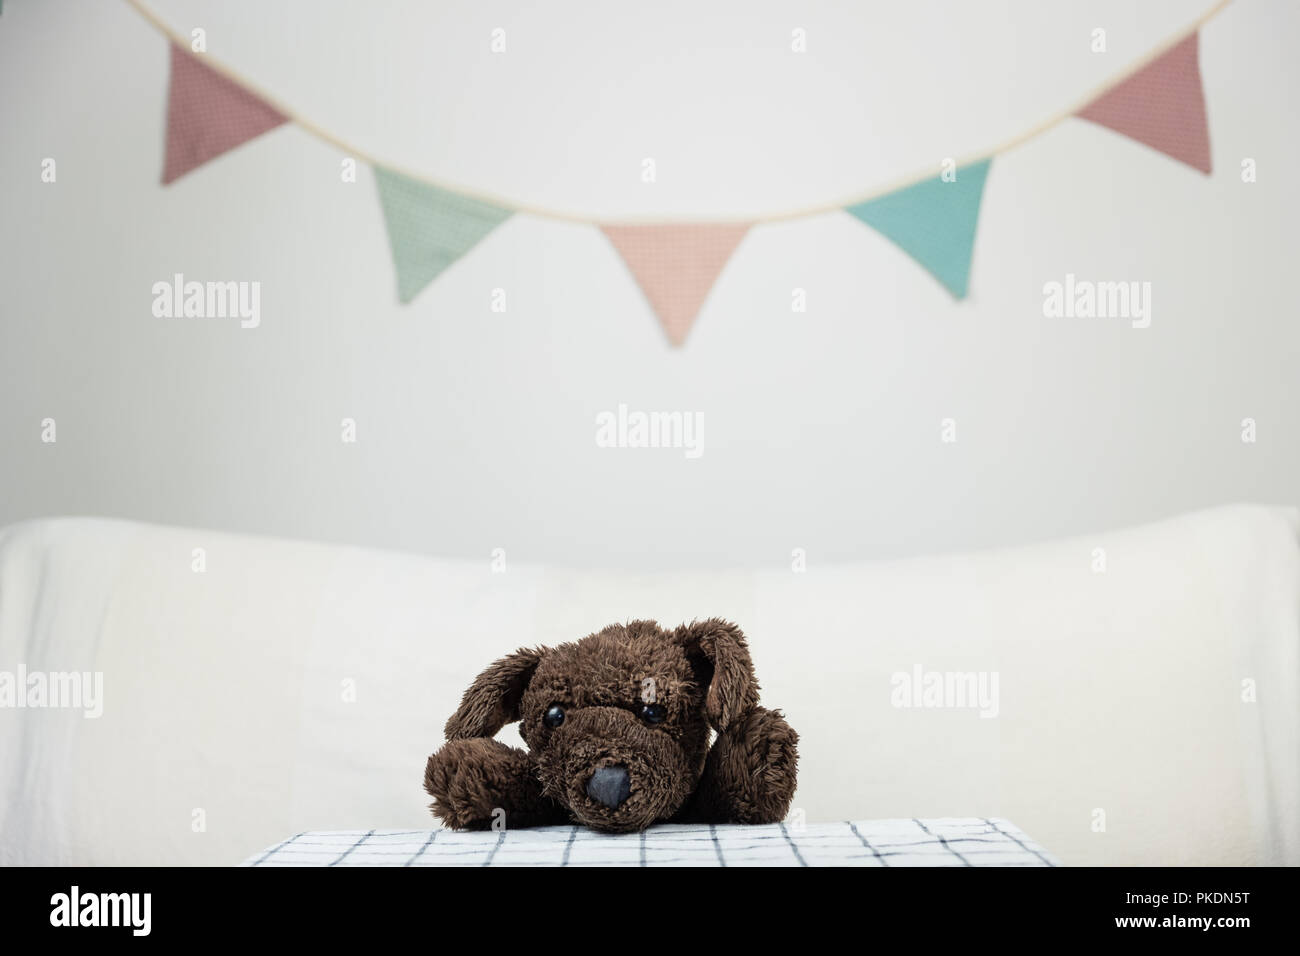 Children party concept with fluffy toy dog at the table. Stock Photo